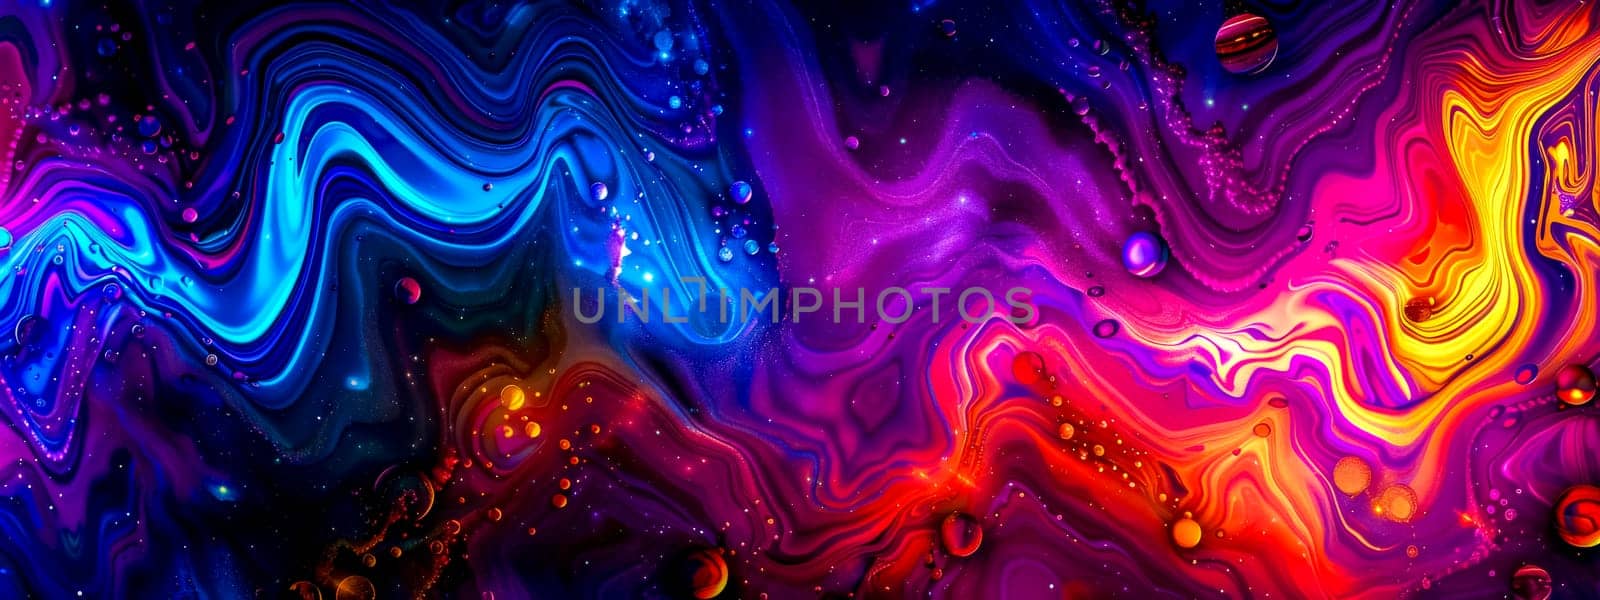 Abstract colorful liquid and marbled waves pattern with a psychedelic vibe